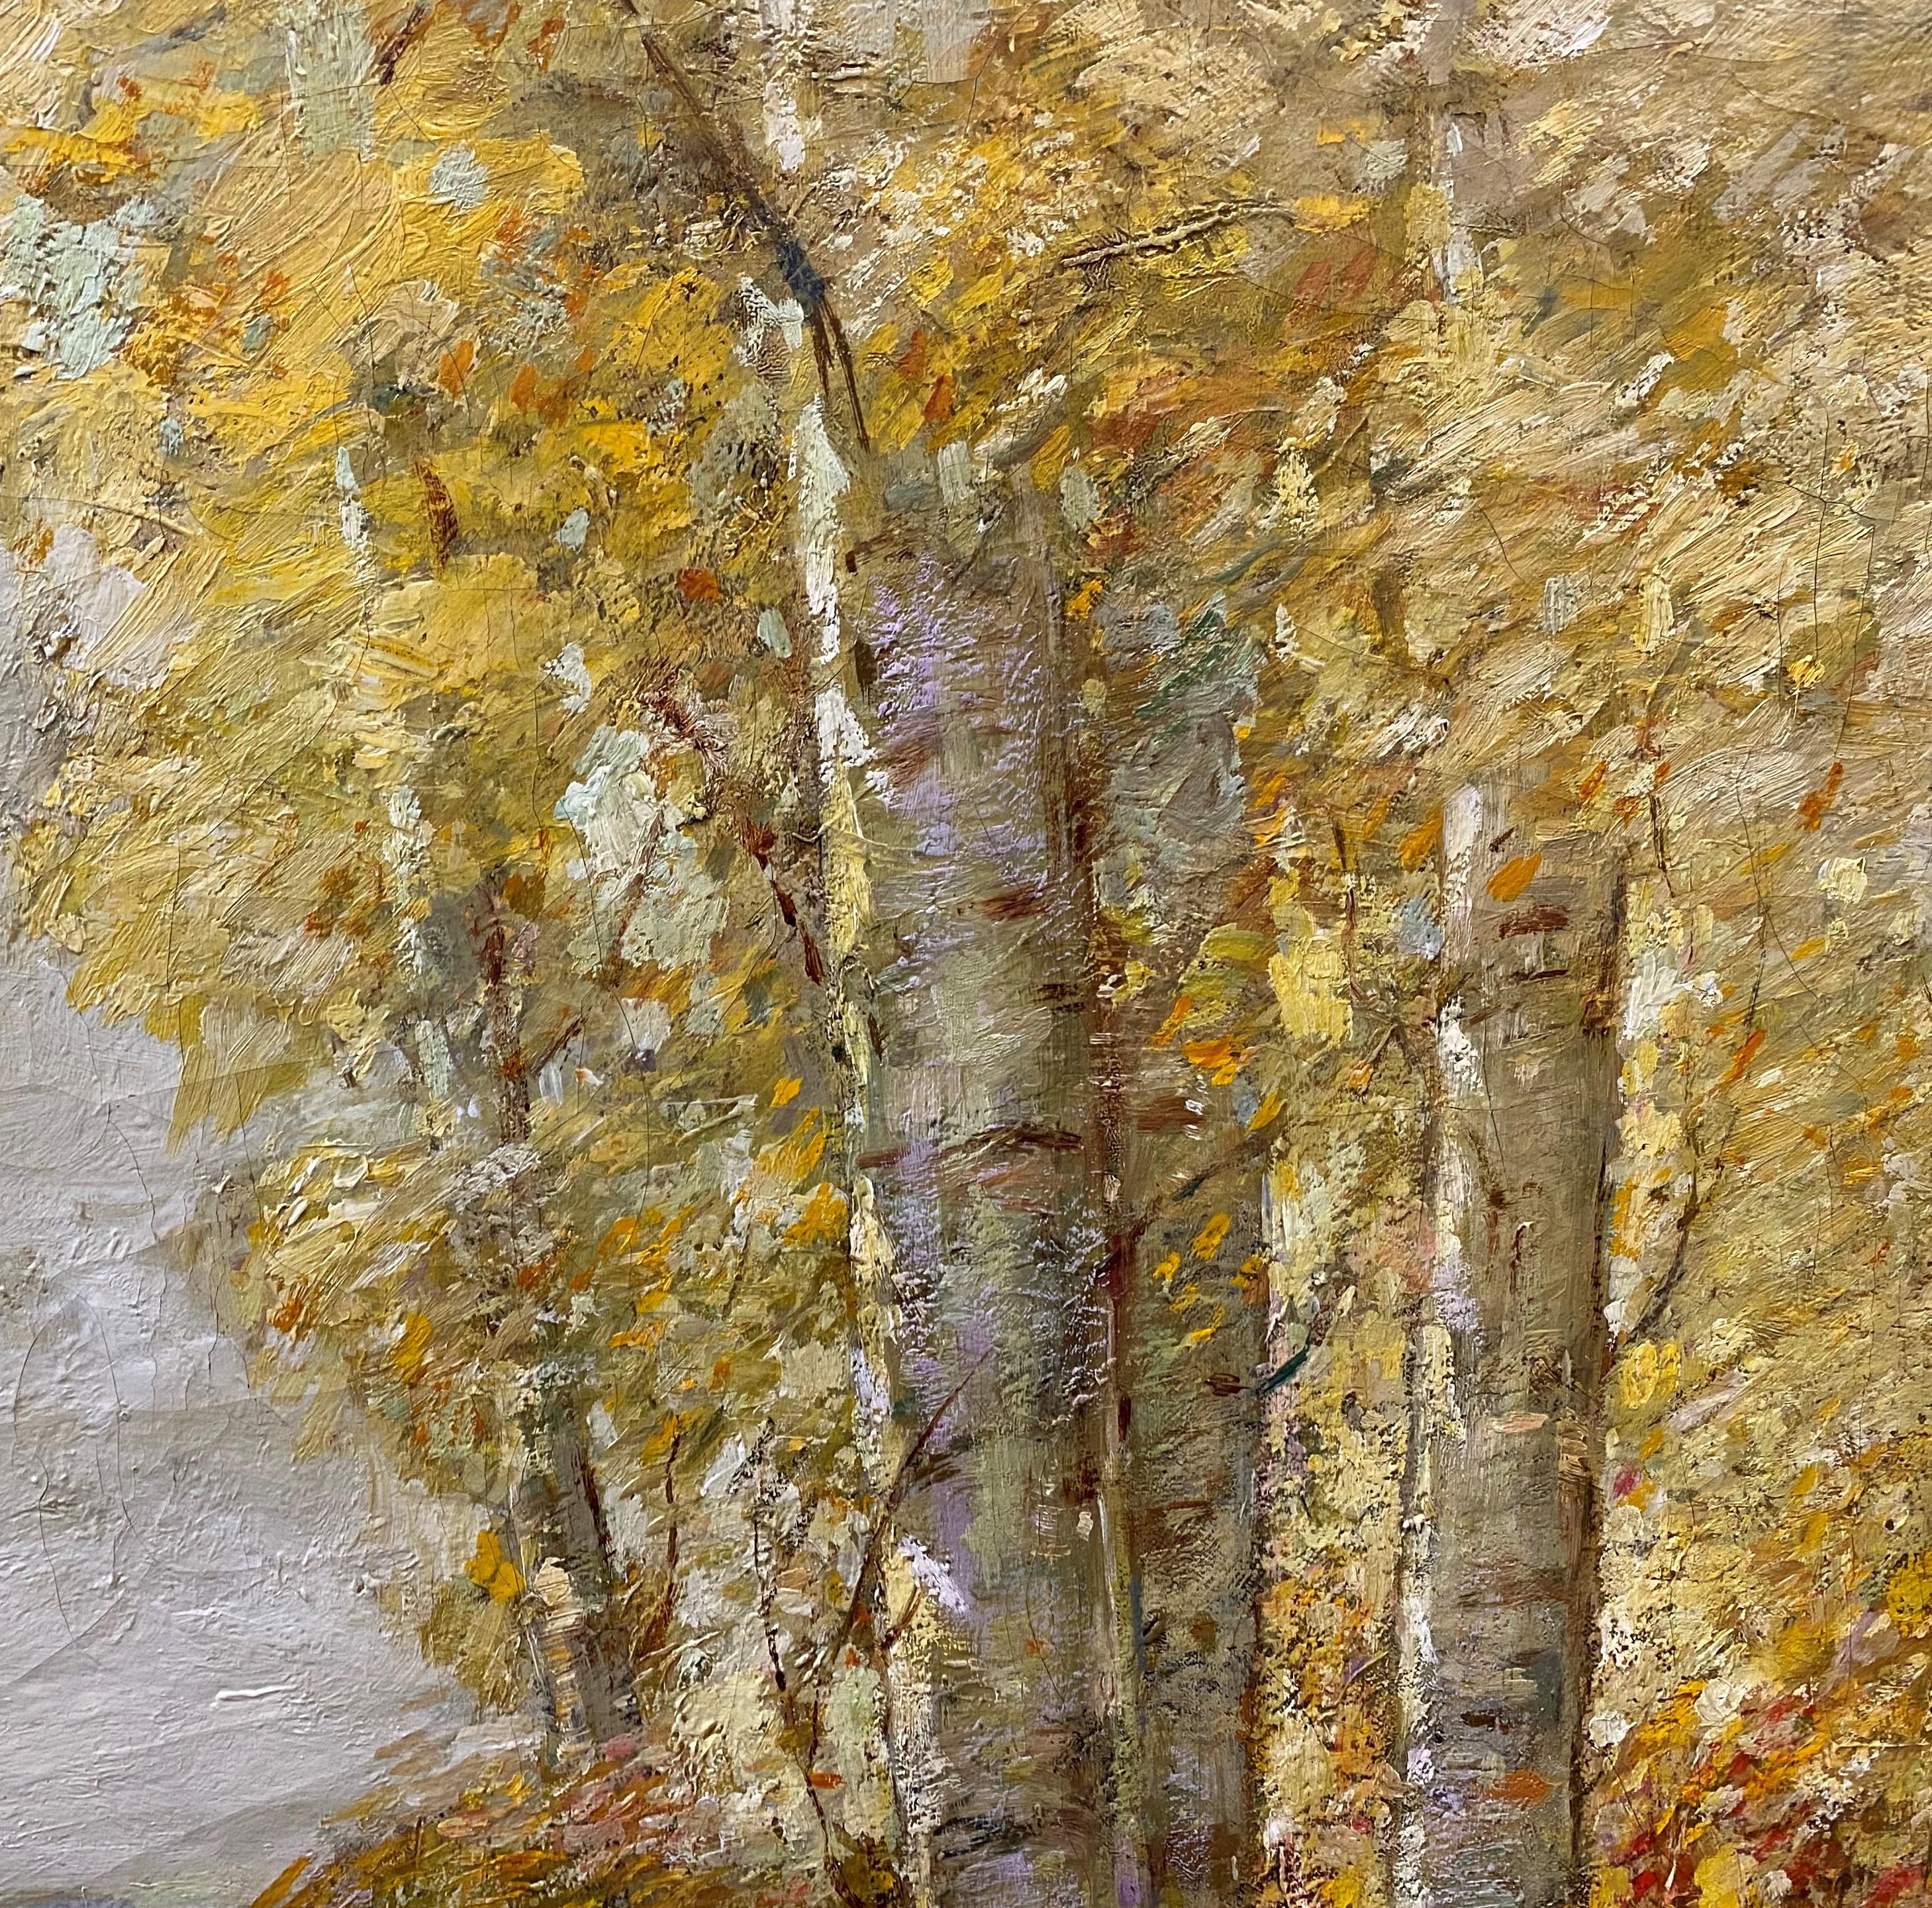 A fine landscape of birch trees in the Adirondacks by American artist Paul Bernard King  (1867-1947). King was born in Buffalo, New York, and after becoming an established printer, went on to study at the NY Art Students League with Henry S.